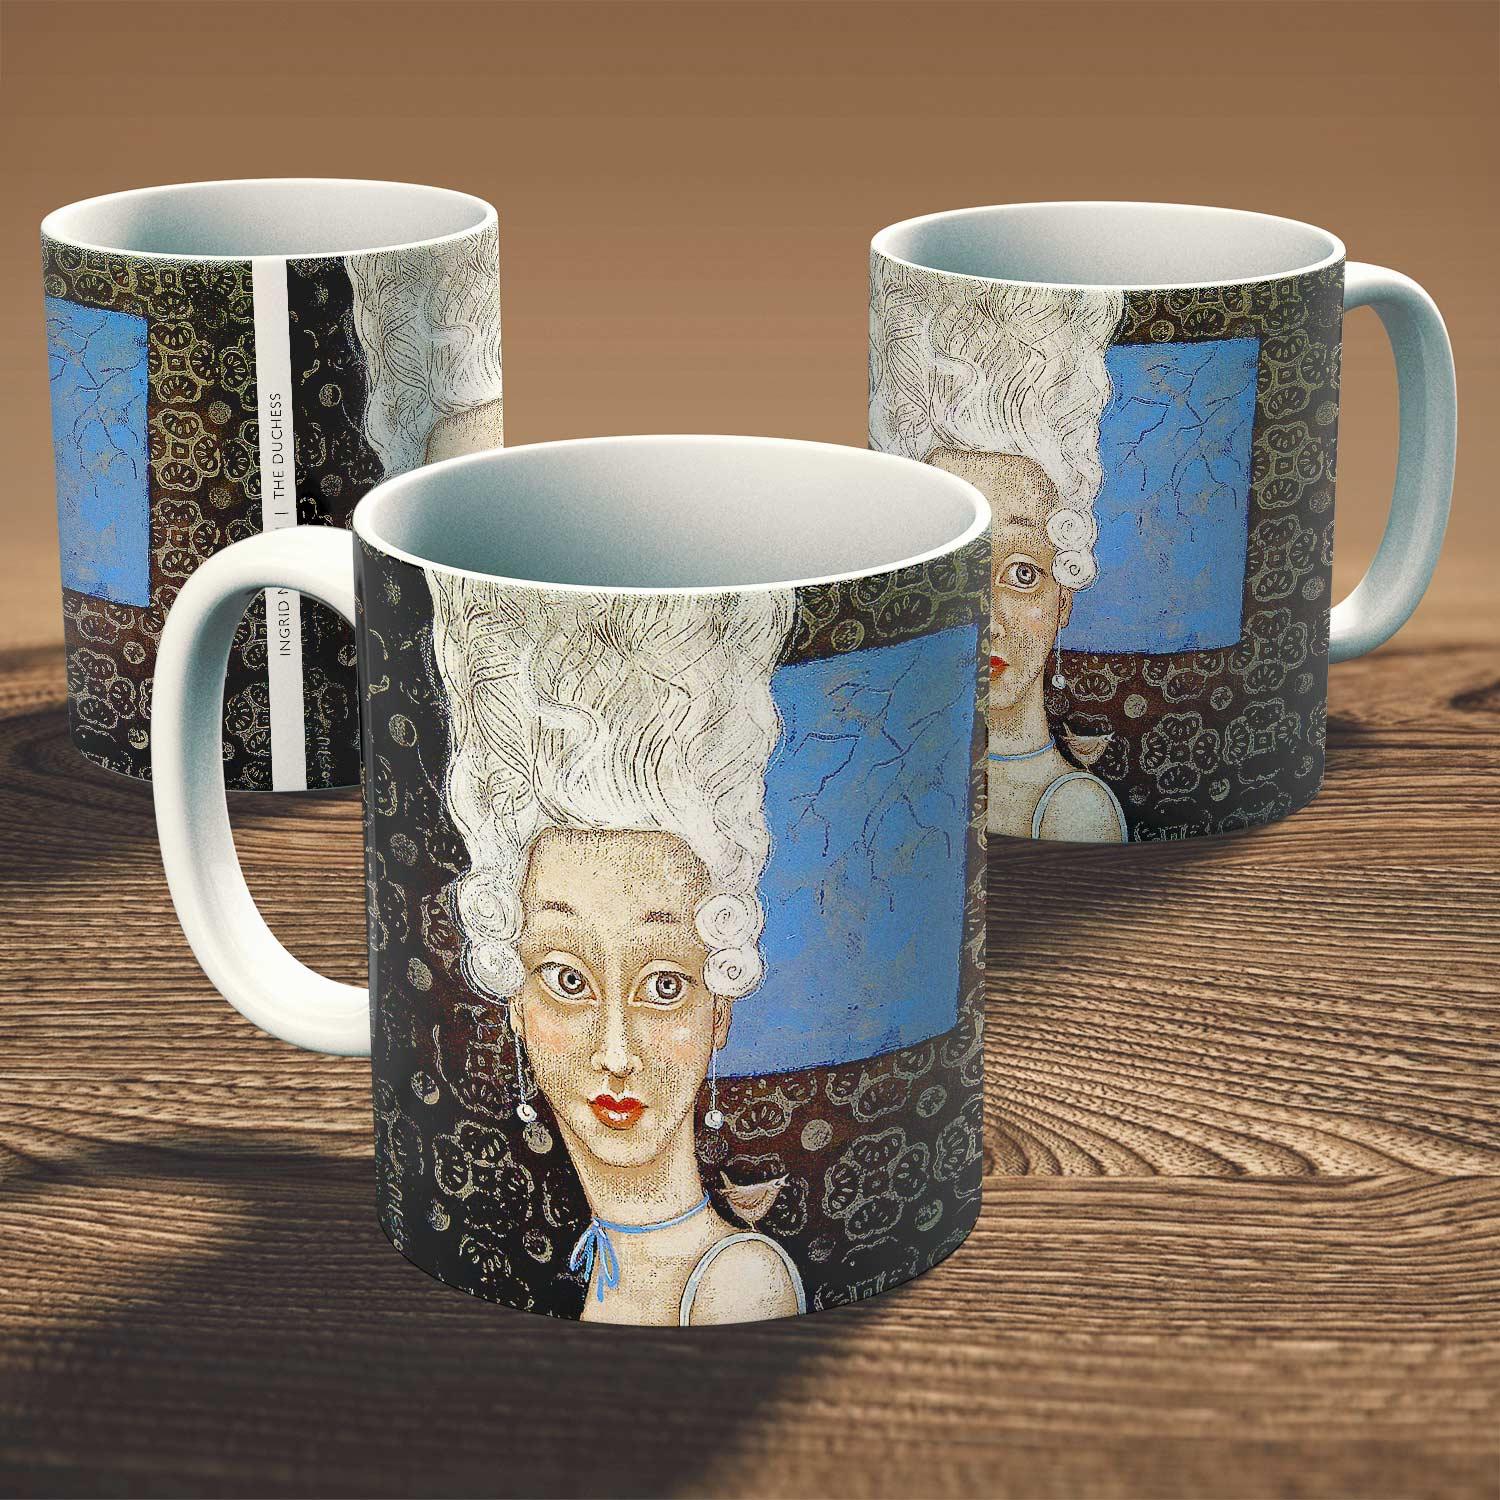 The Duchess Mug from an original painting by artist Ingrid Nilsson